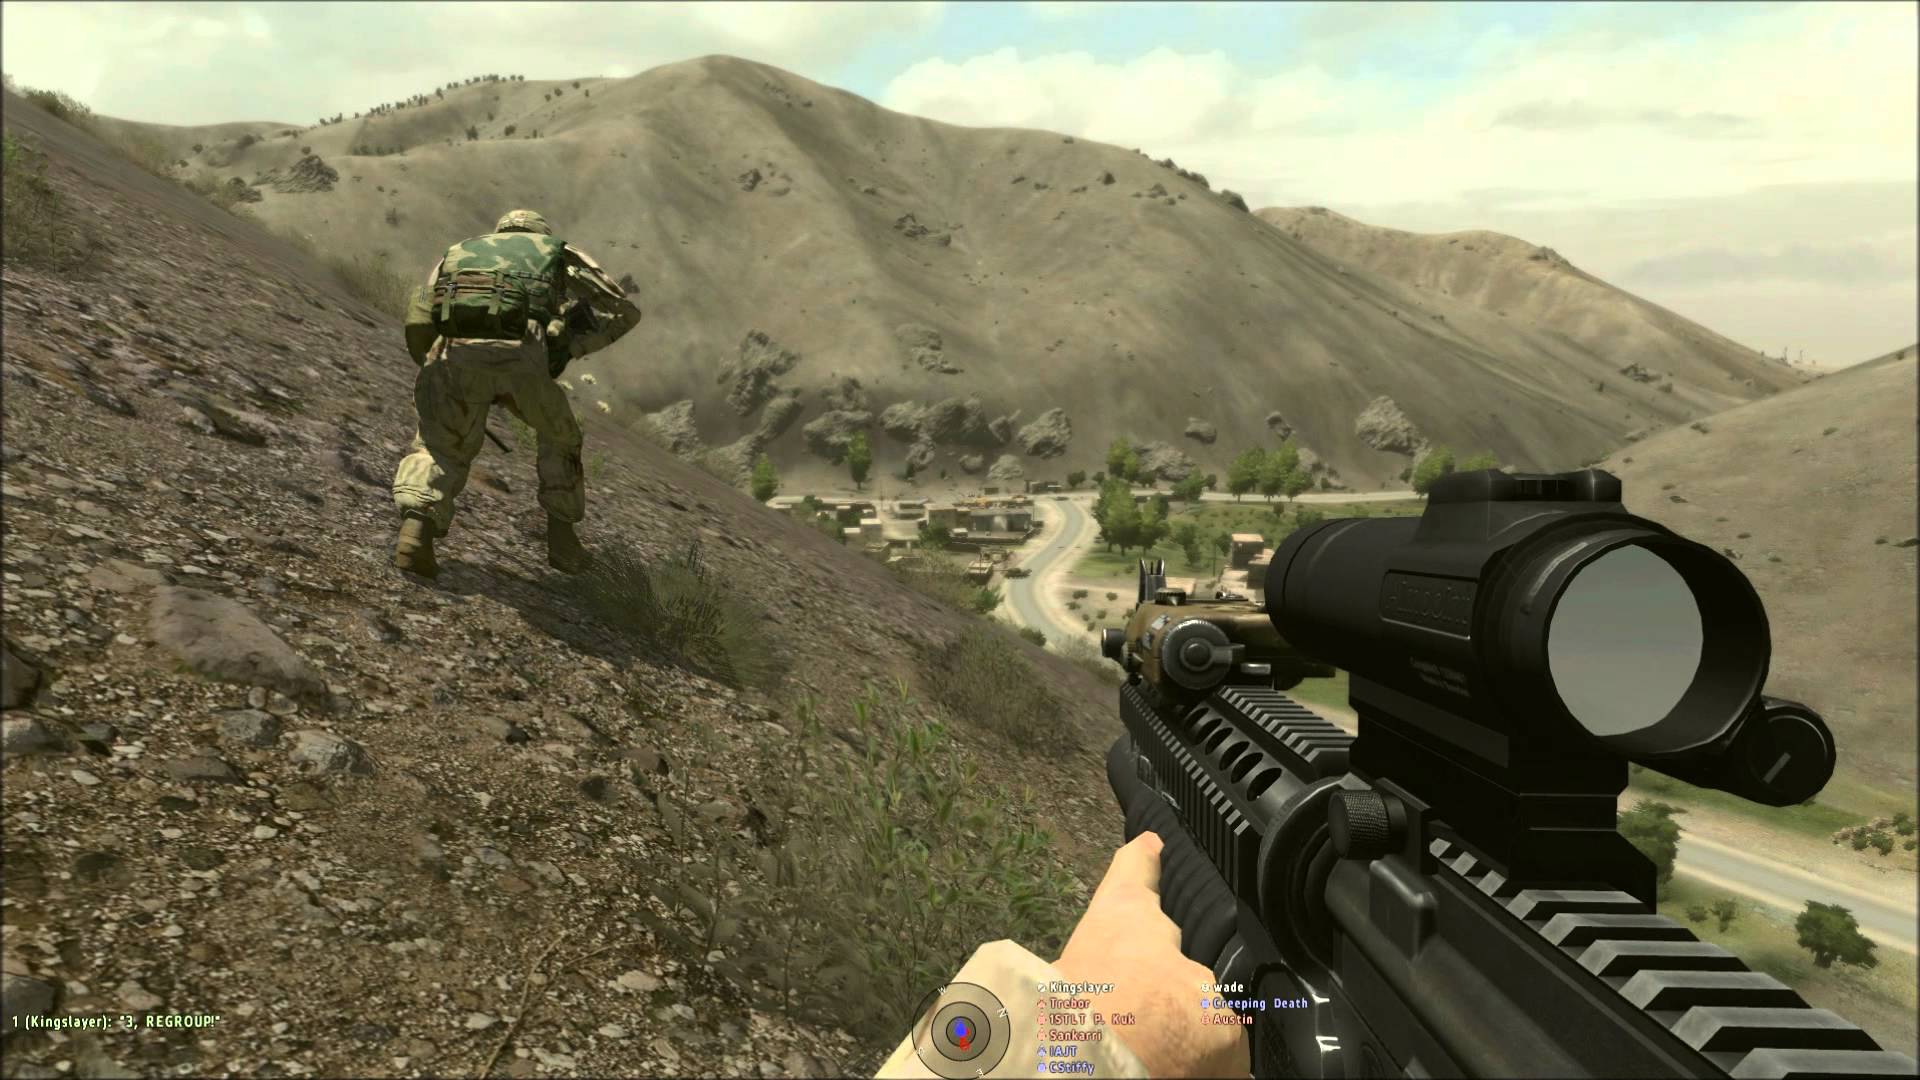 arma 2 combined operations free download full game